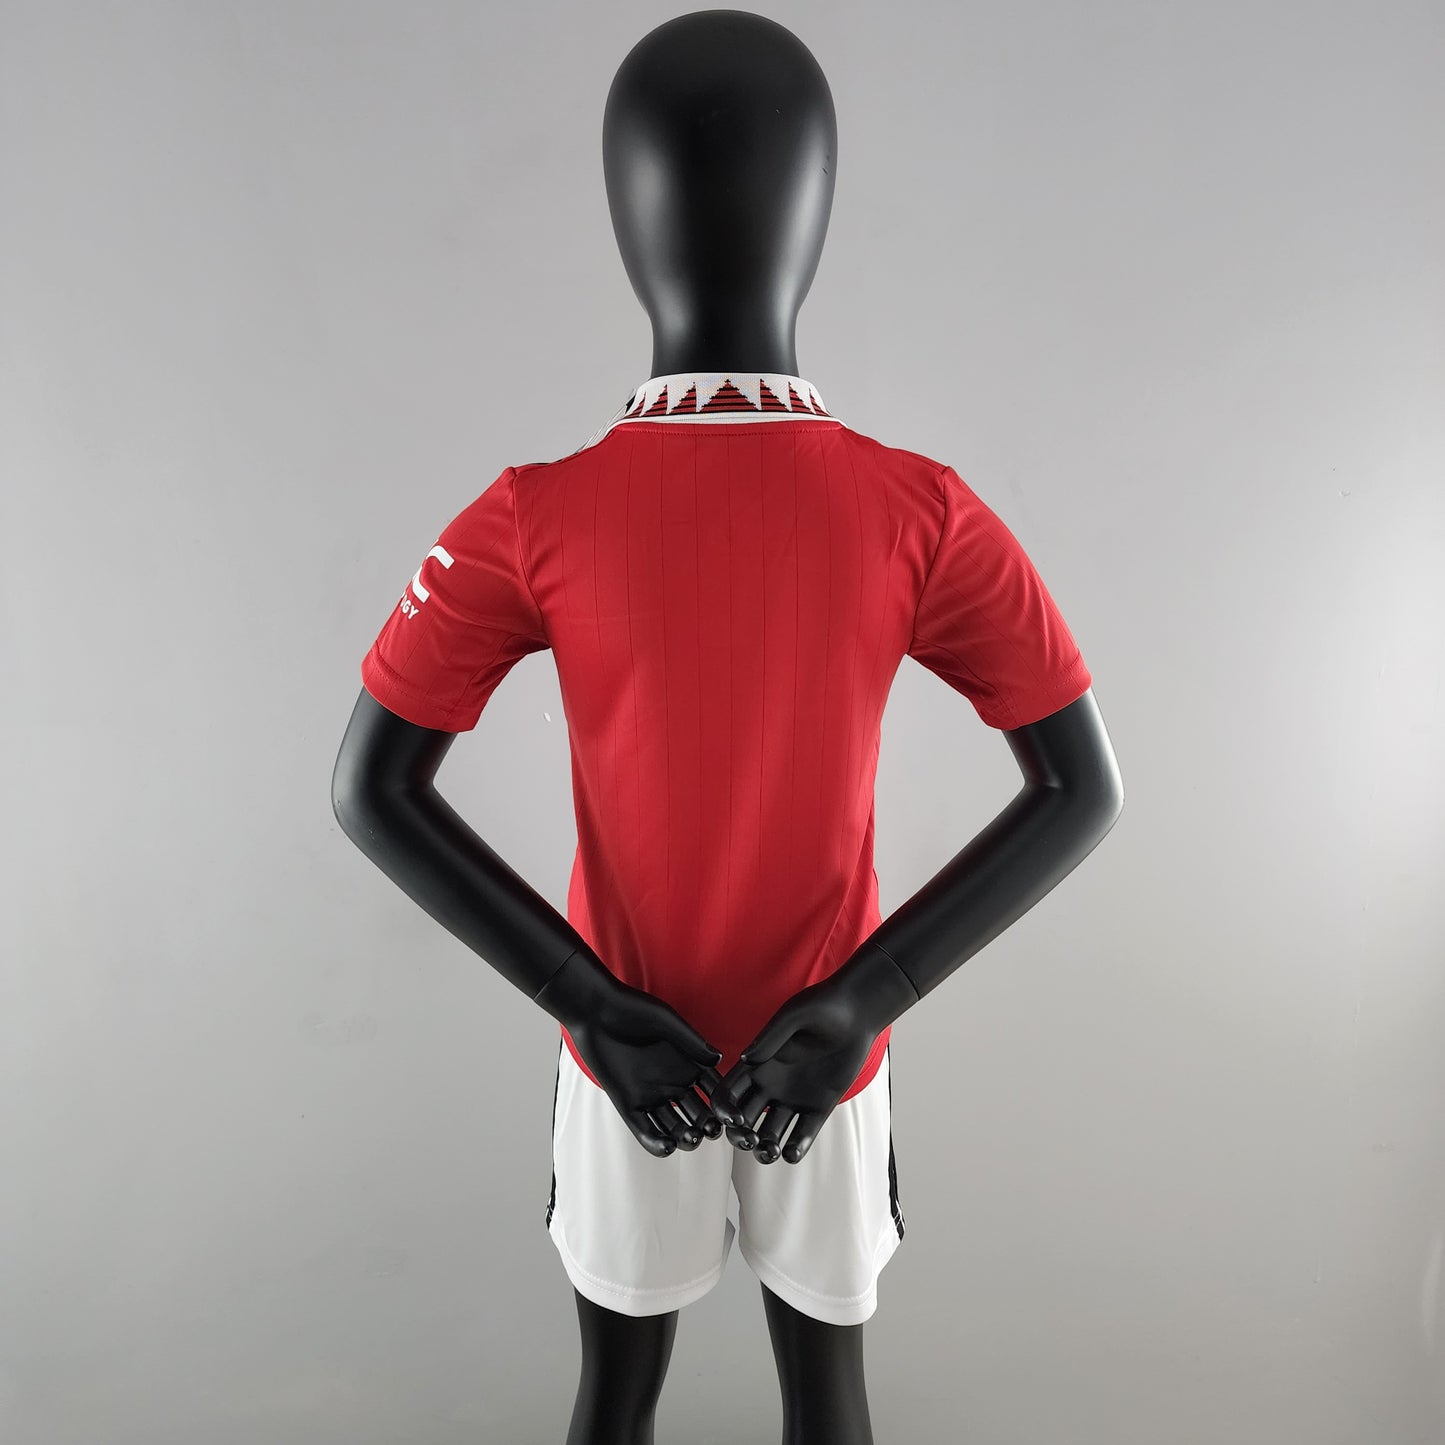 Kids Manchester United 2022/23 Home Jersey & Shorts